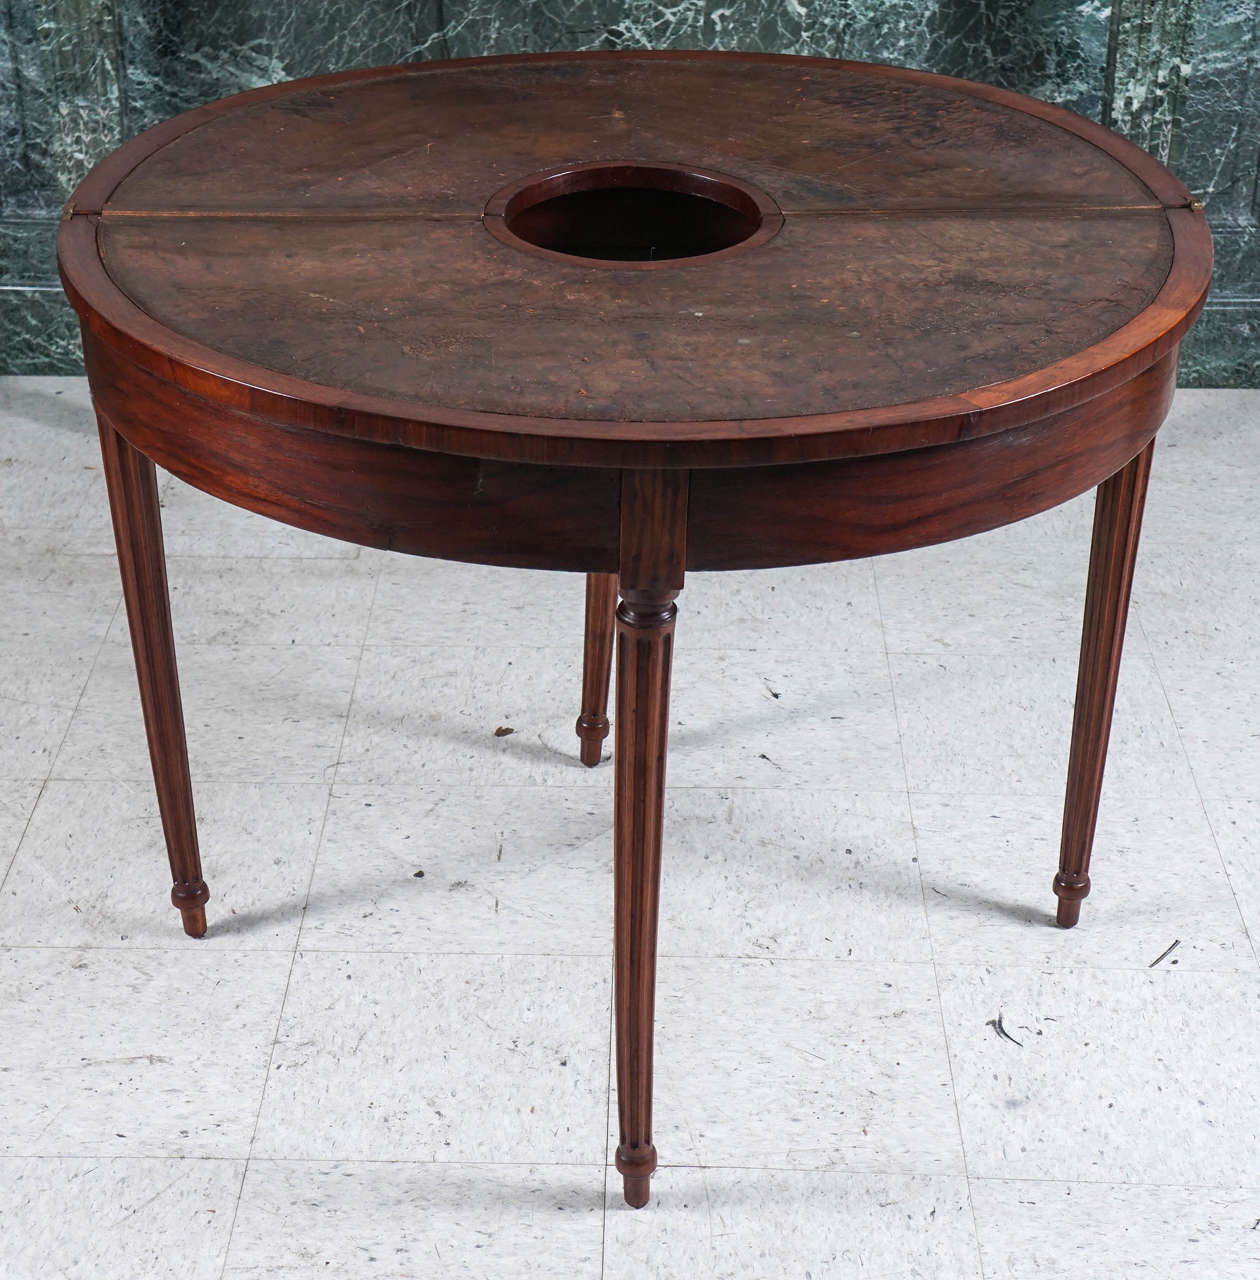 This table made in France during the brief period of the Directoire period circa 1790 is of a very unusual form. Crafted from mahogany solids and veneers the D shape opens with a slide out leg concealing a drawer and creating a round leather topped